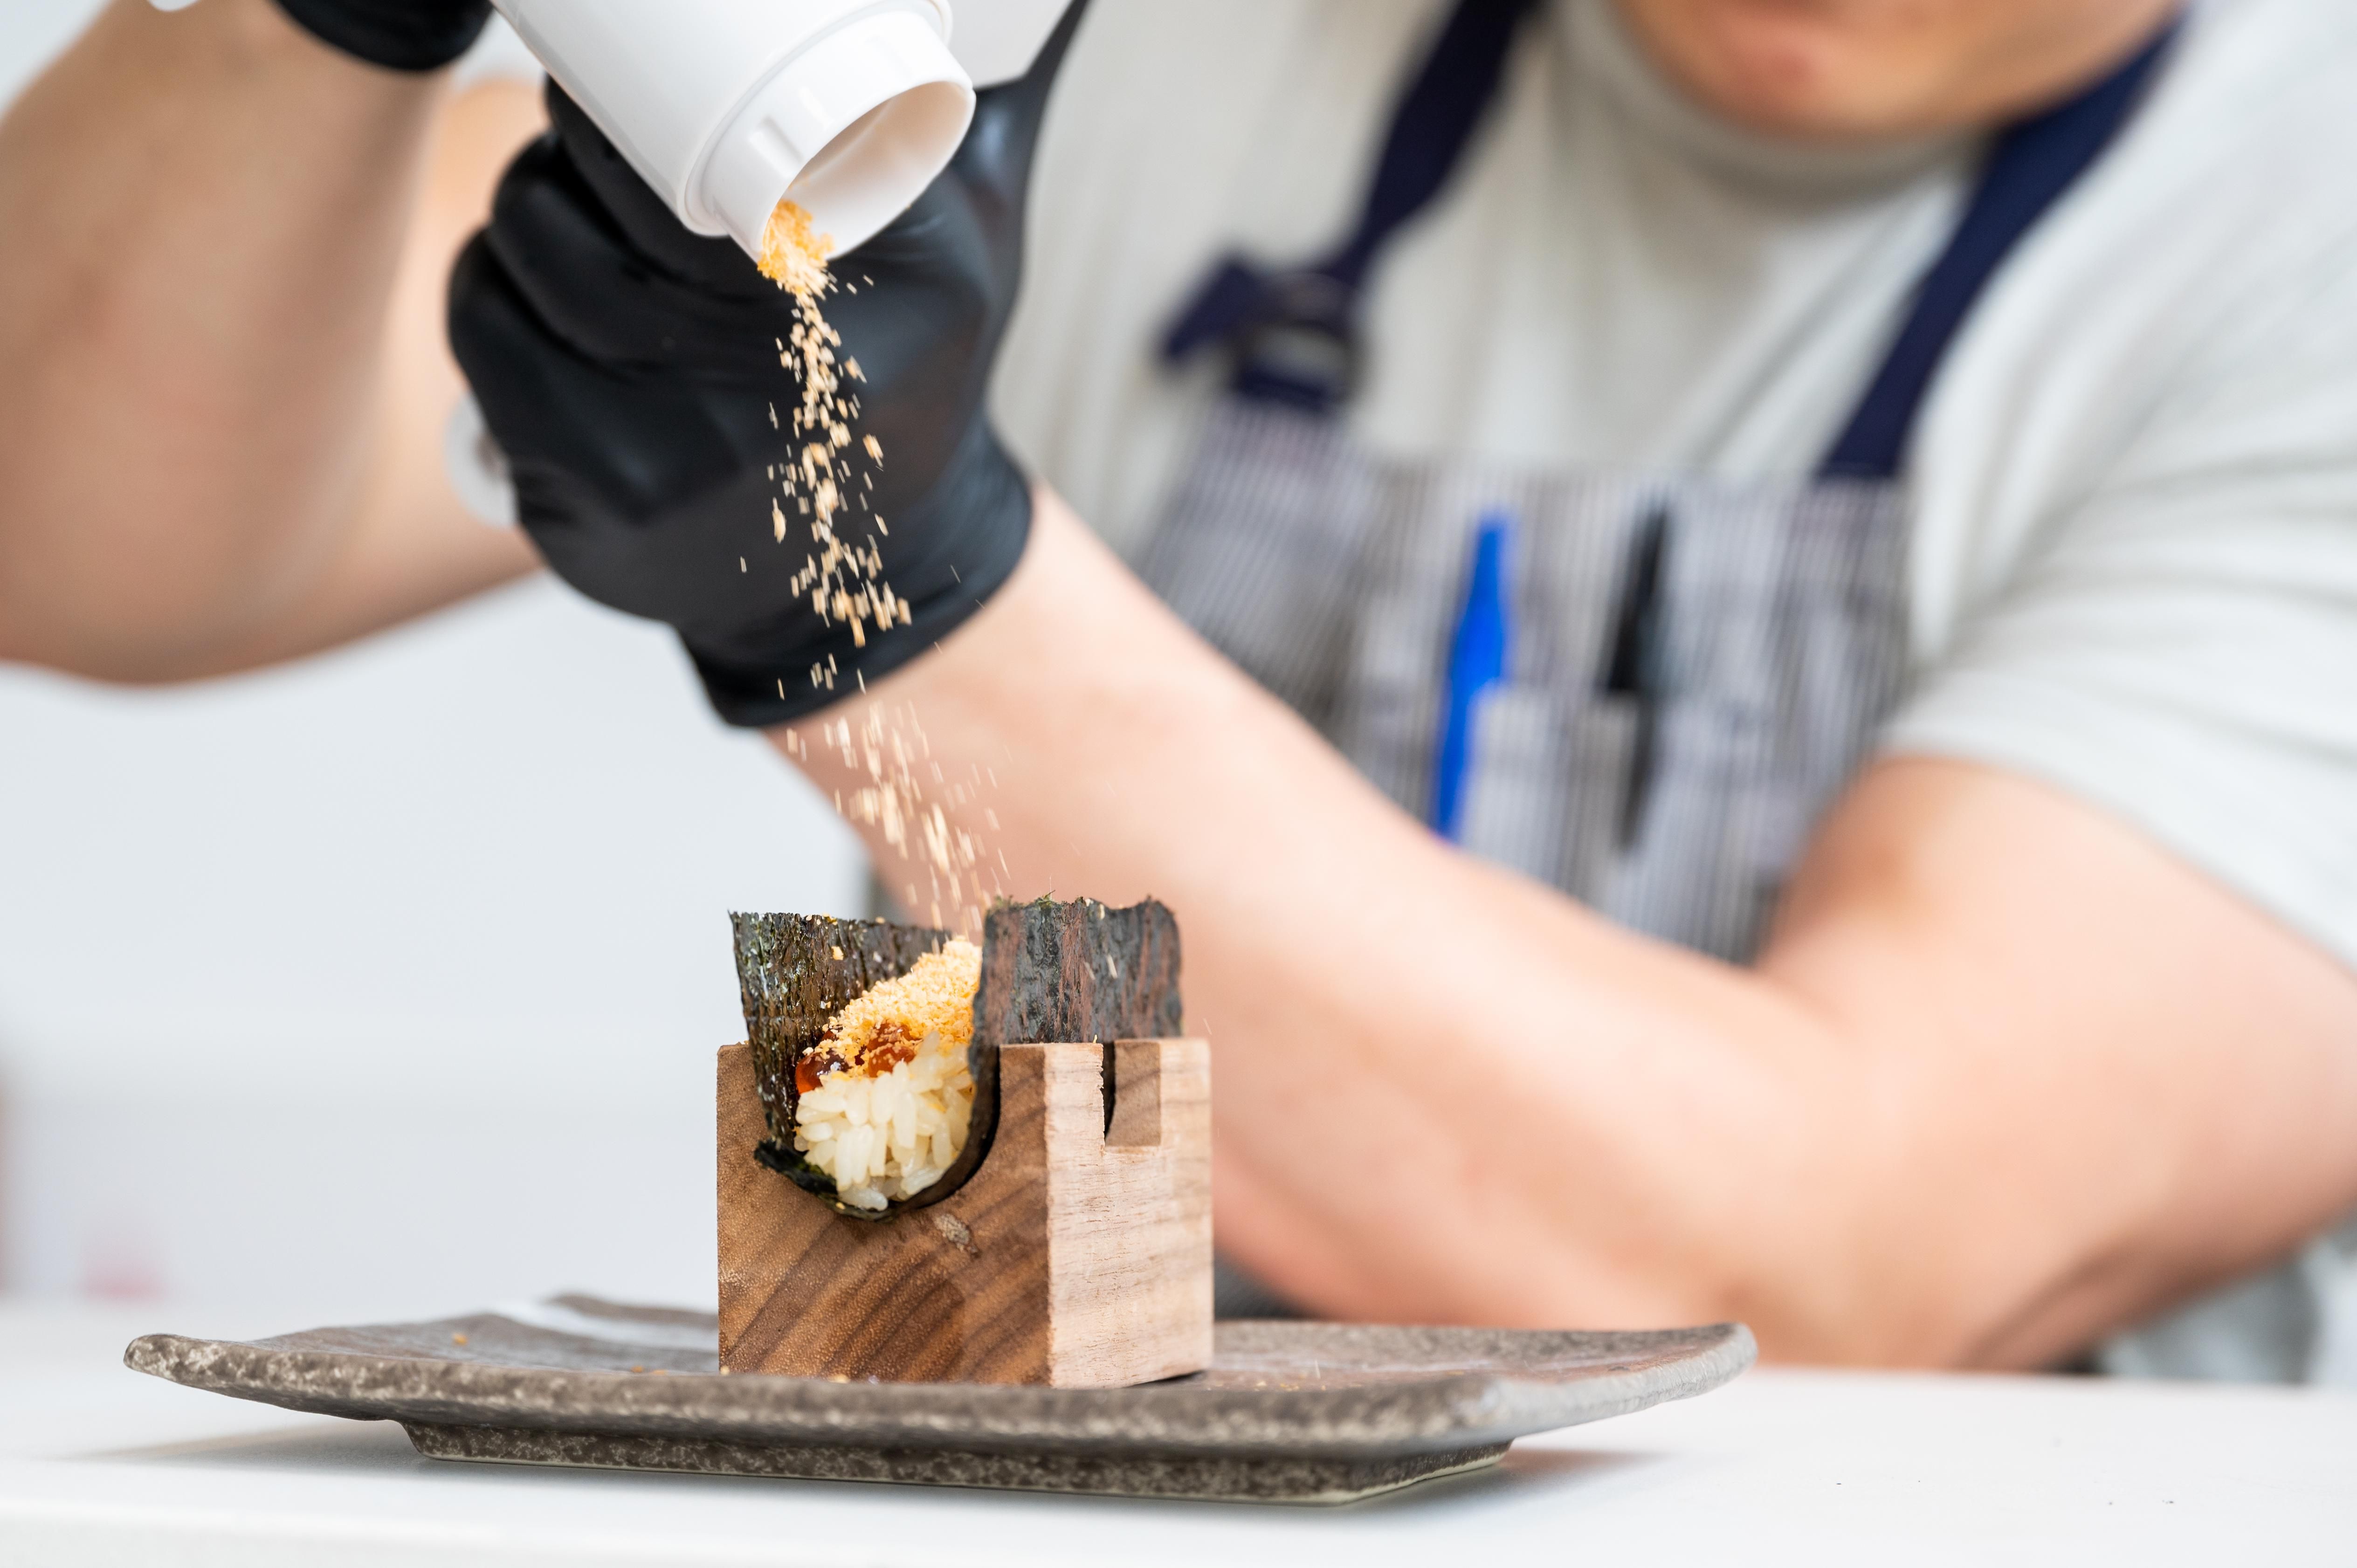 First Taste: The Mission's Handroll Project brings affordable fine sushi to our fingertips